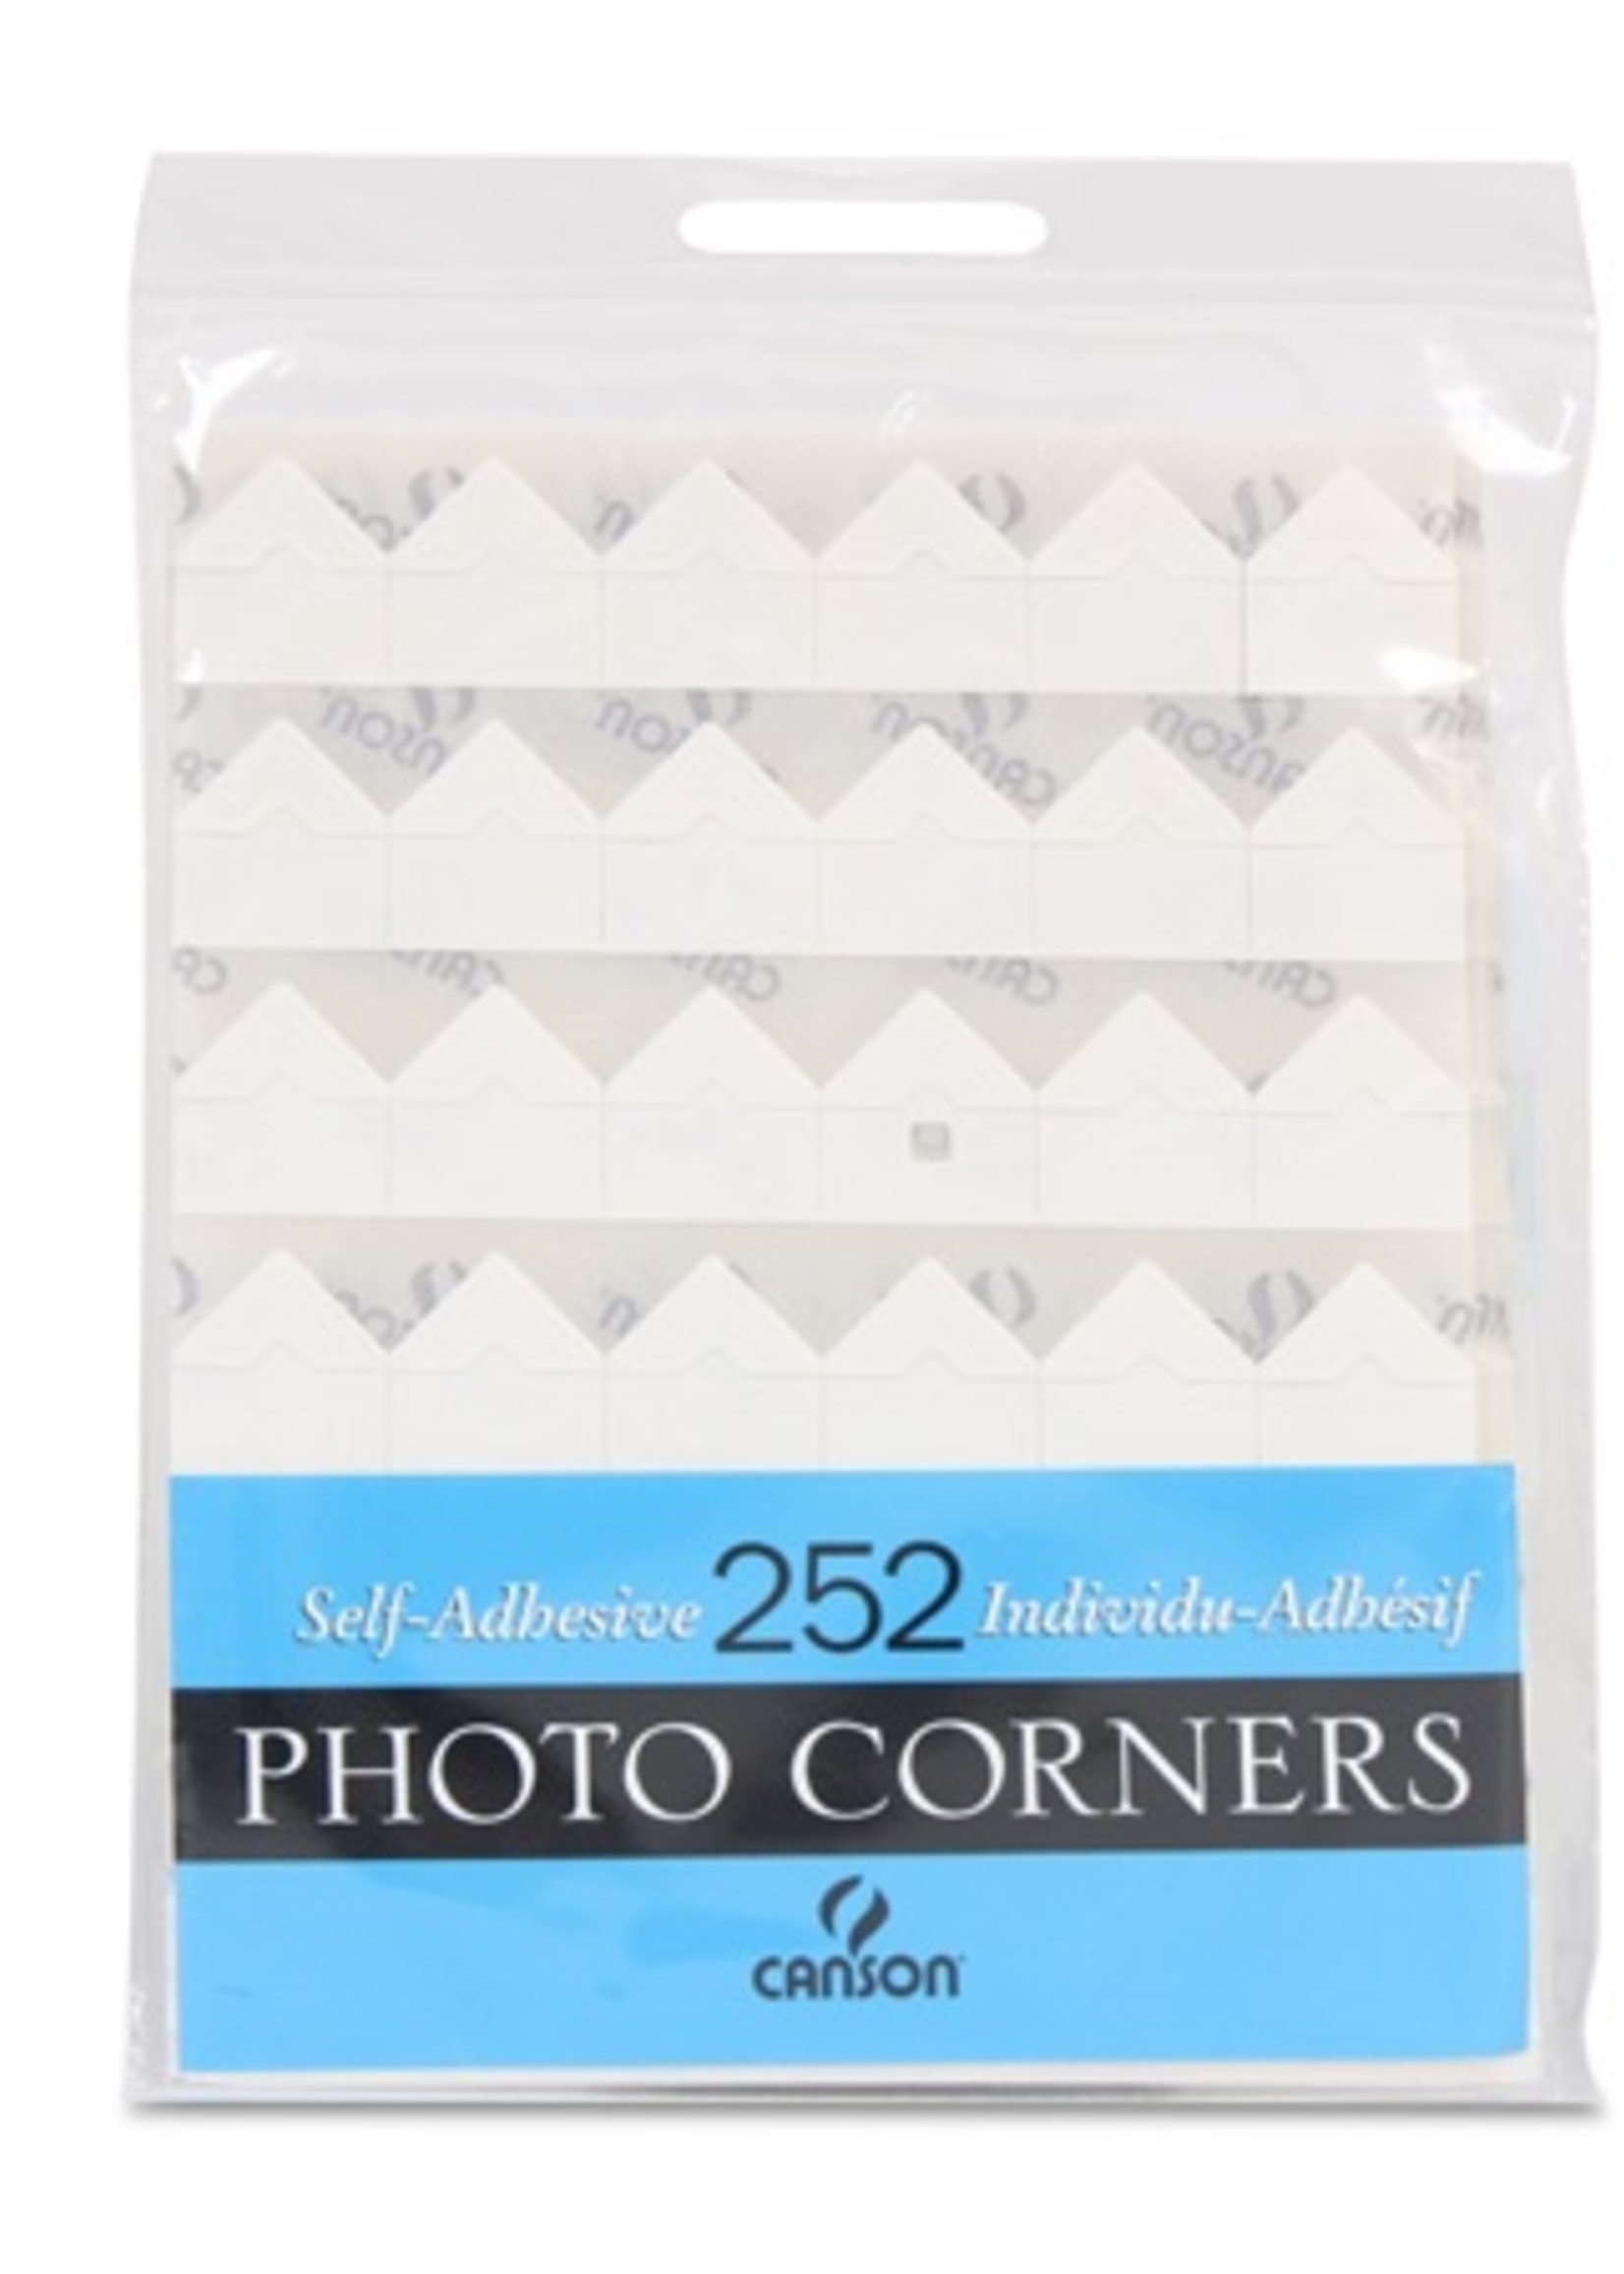 CANSON CANSON PHOTO CORNERS SELF-ADHESIVE IVORY 252/PK    CAN-100510403